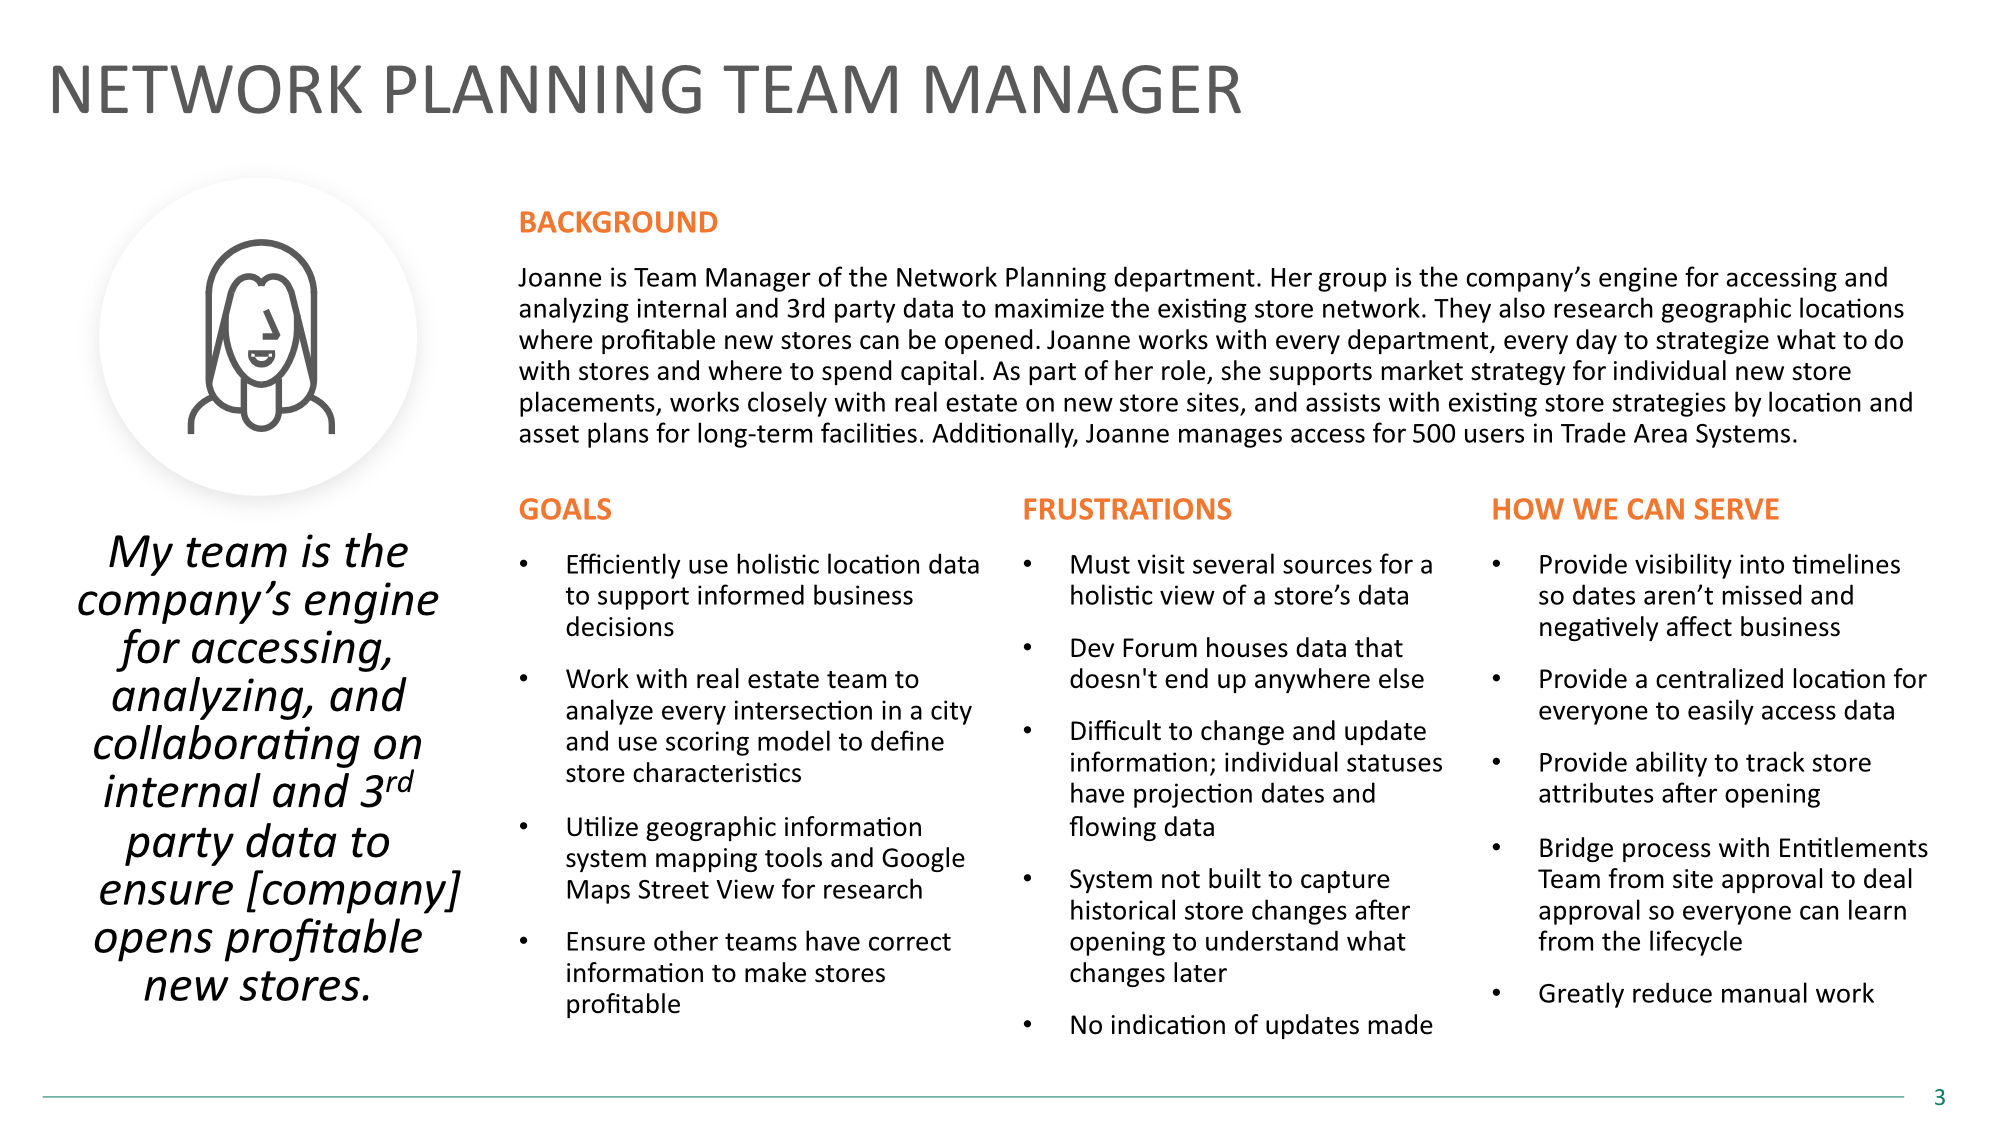 Persona - Network Planning Team Manager